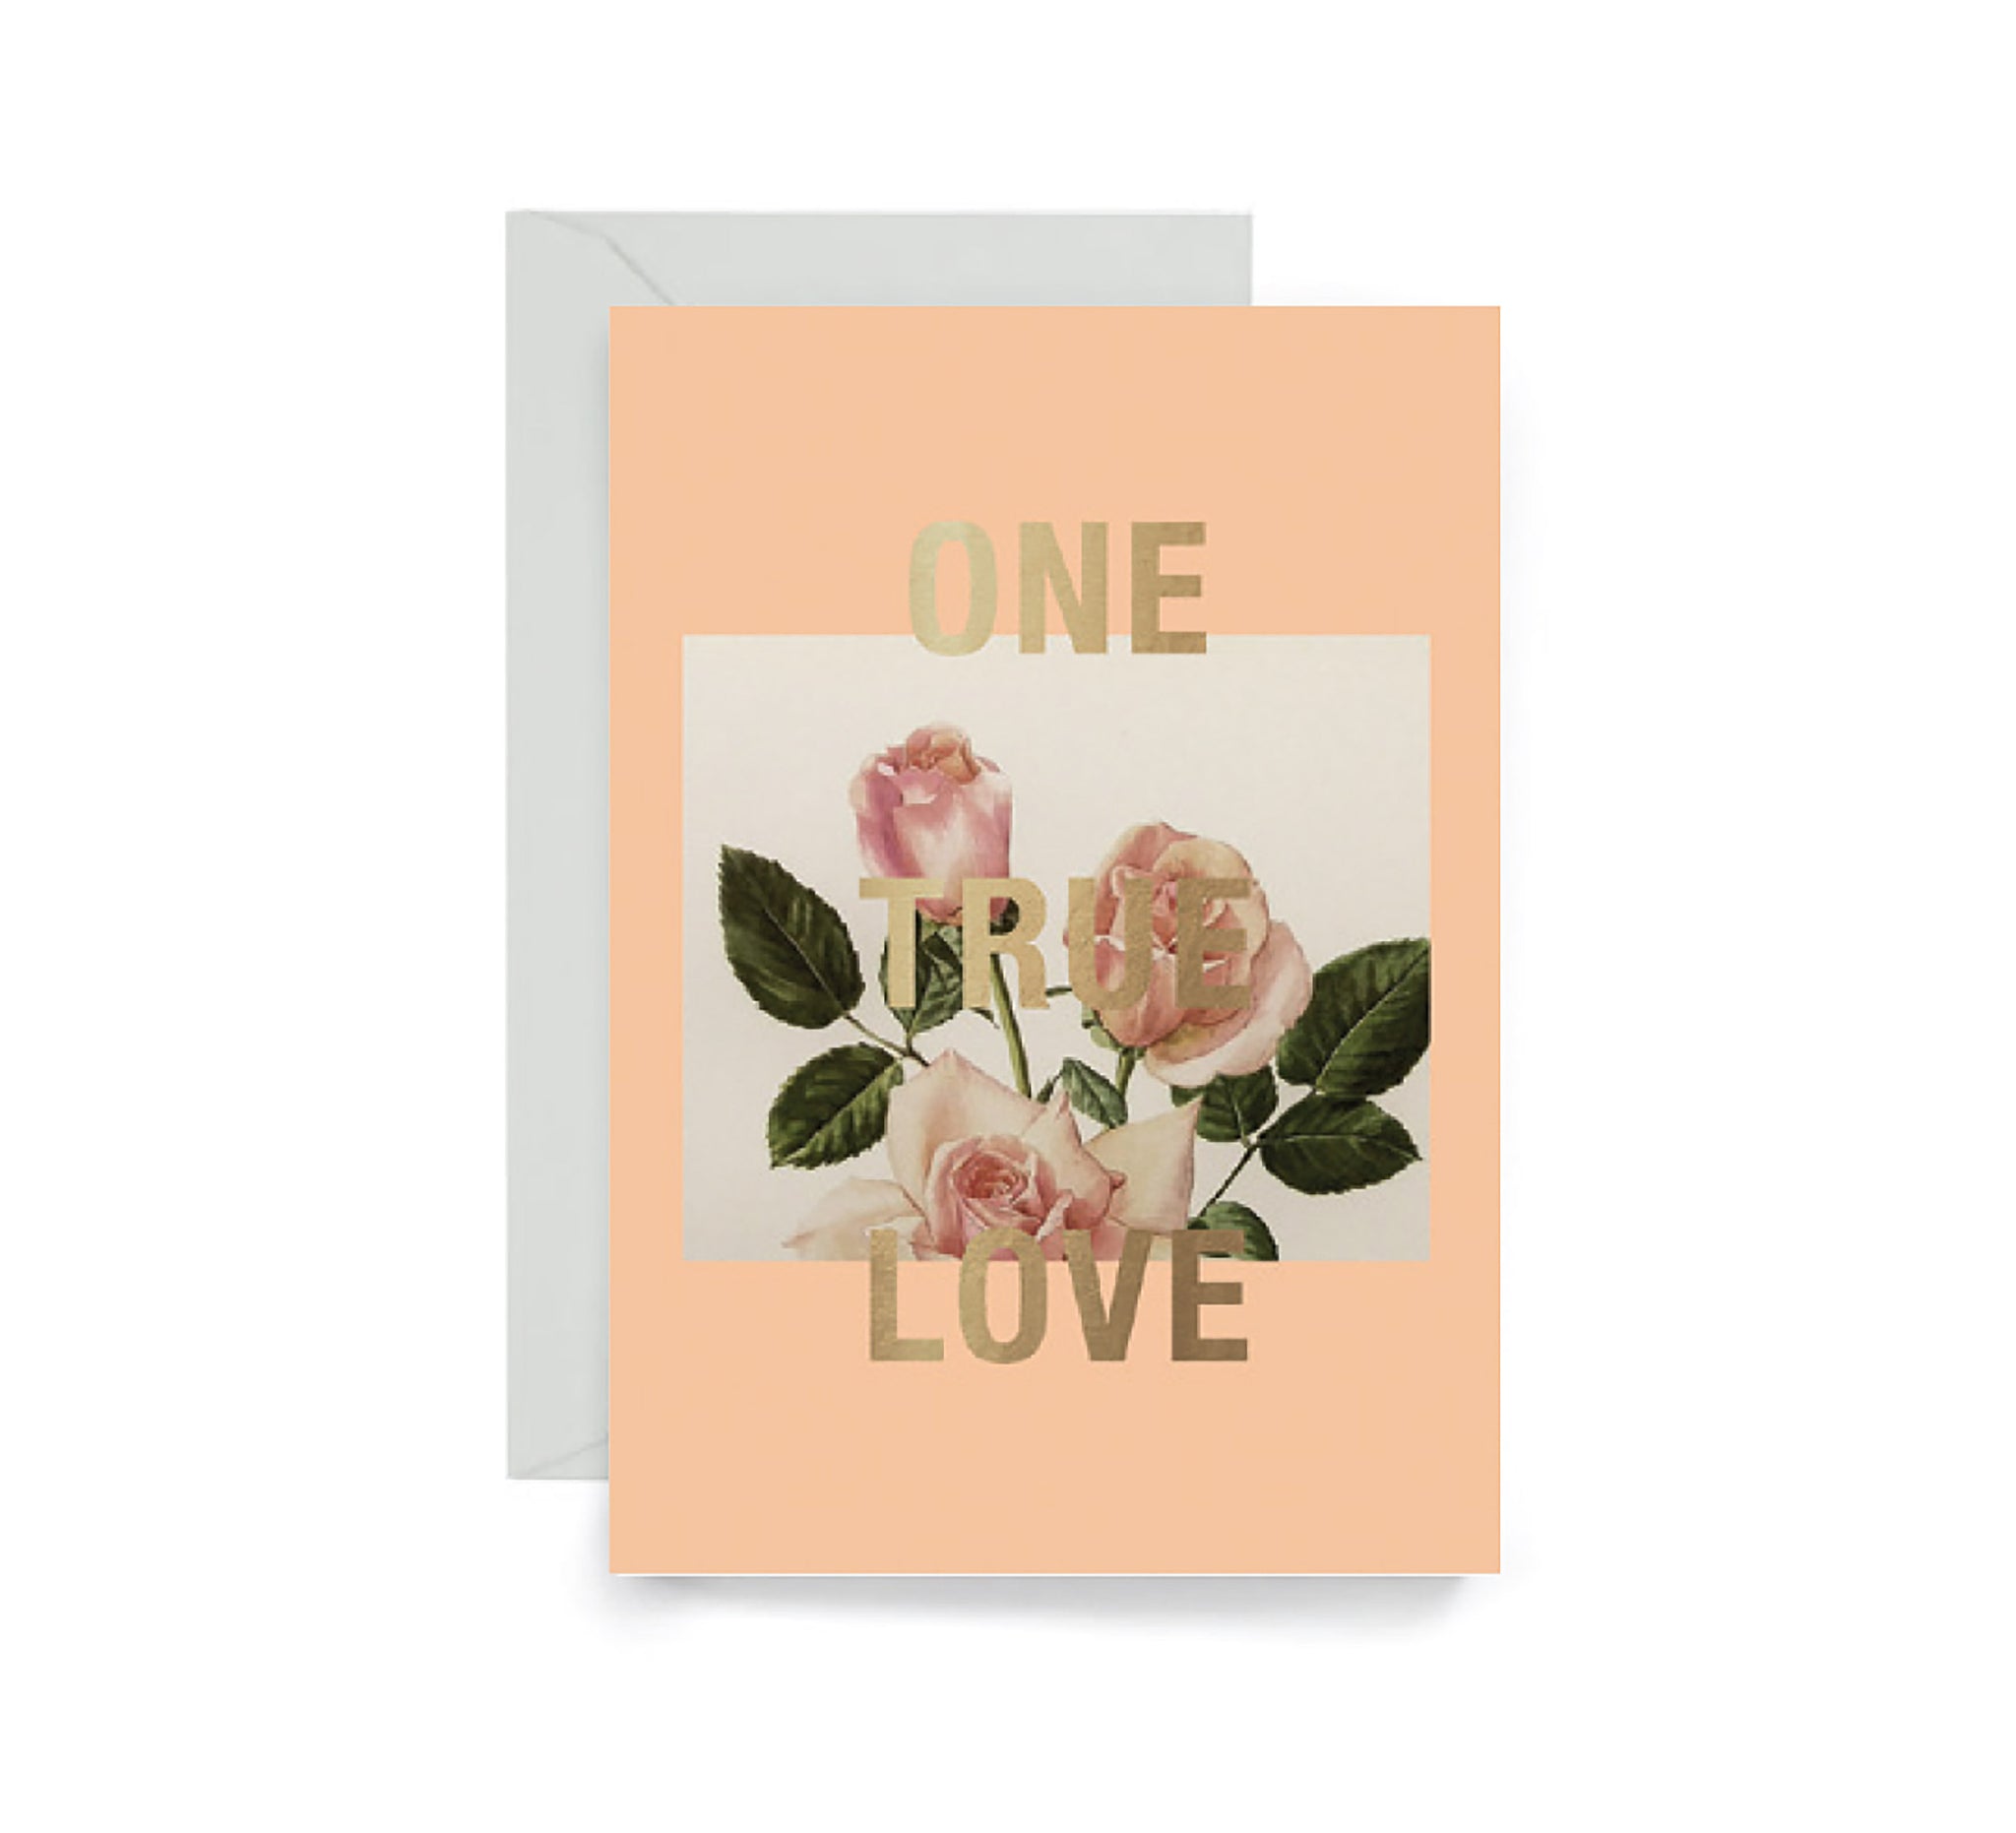 05. ONE TRUE LOVE CARDS - (PACK OF 6)